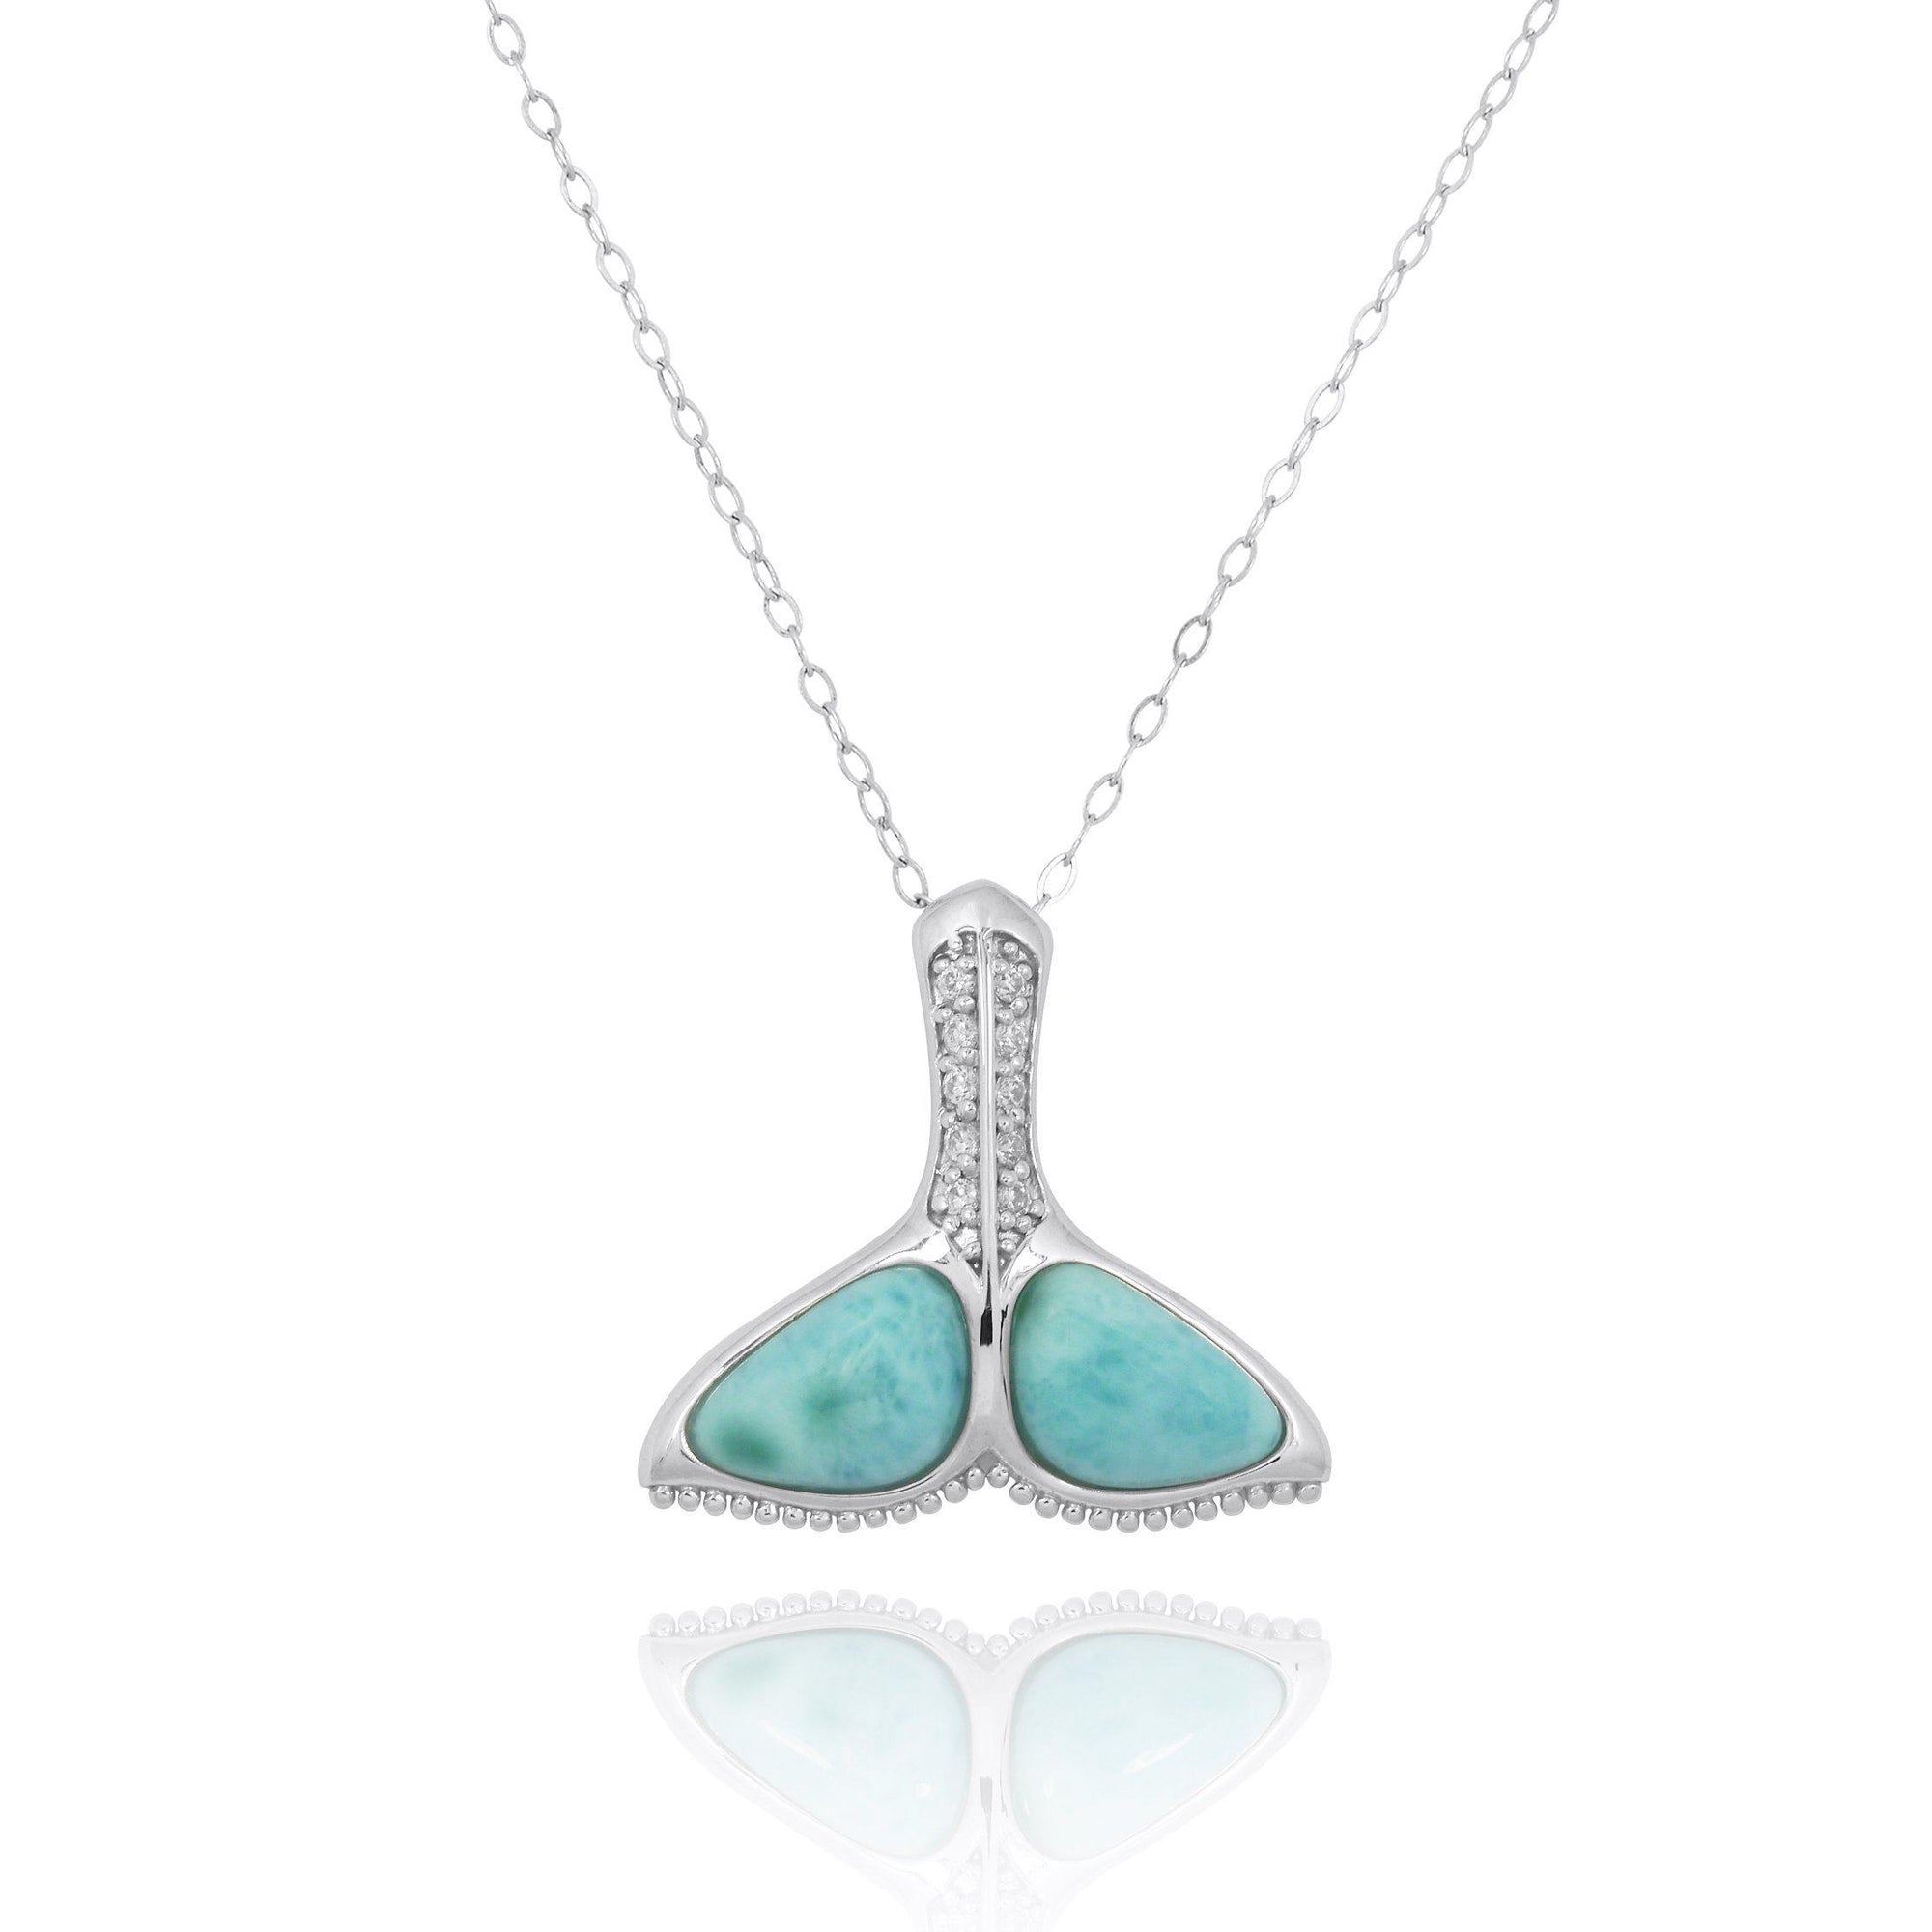 Whale Tail Necklace with Larimar